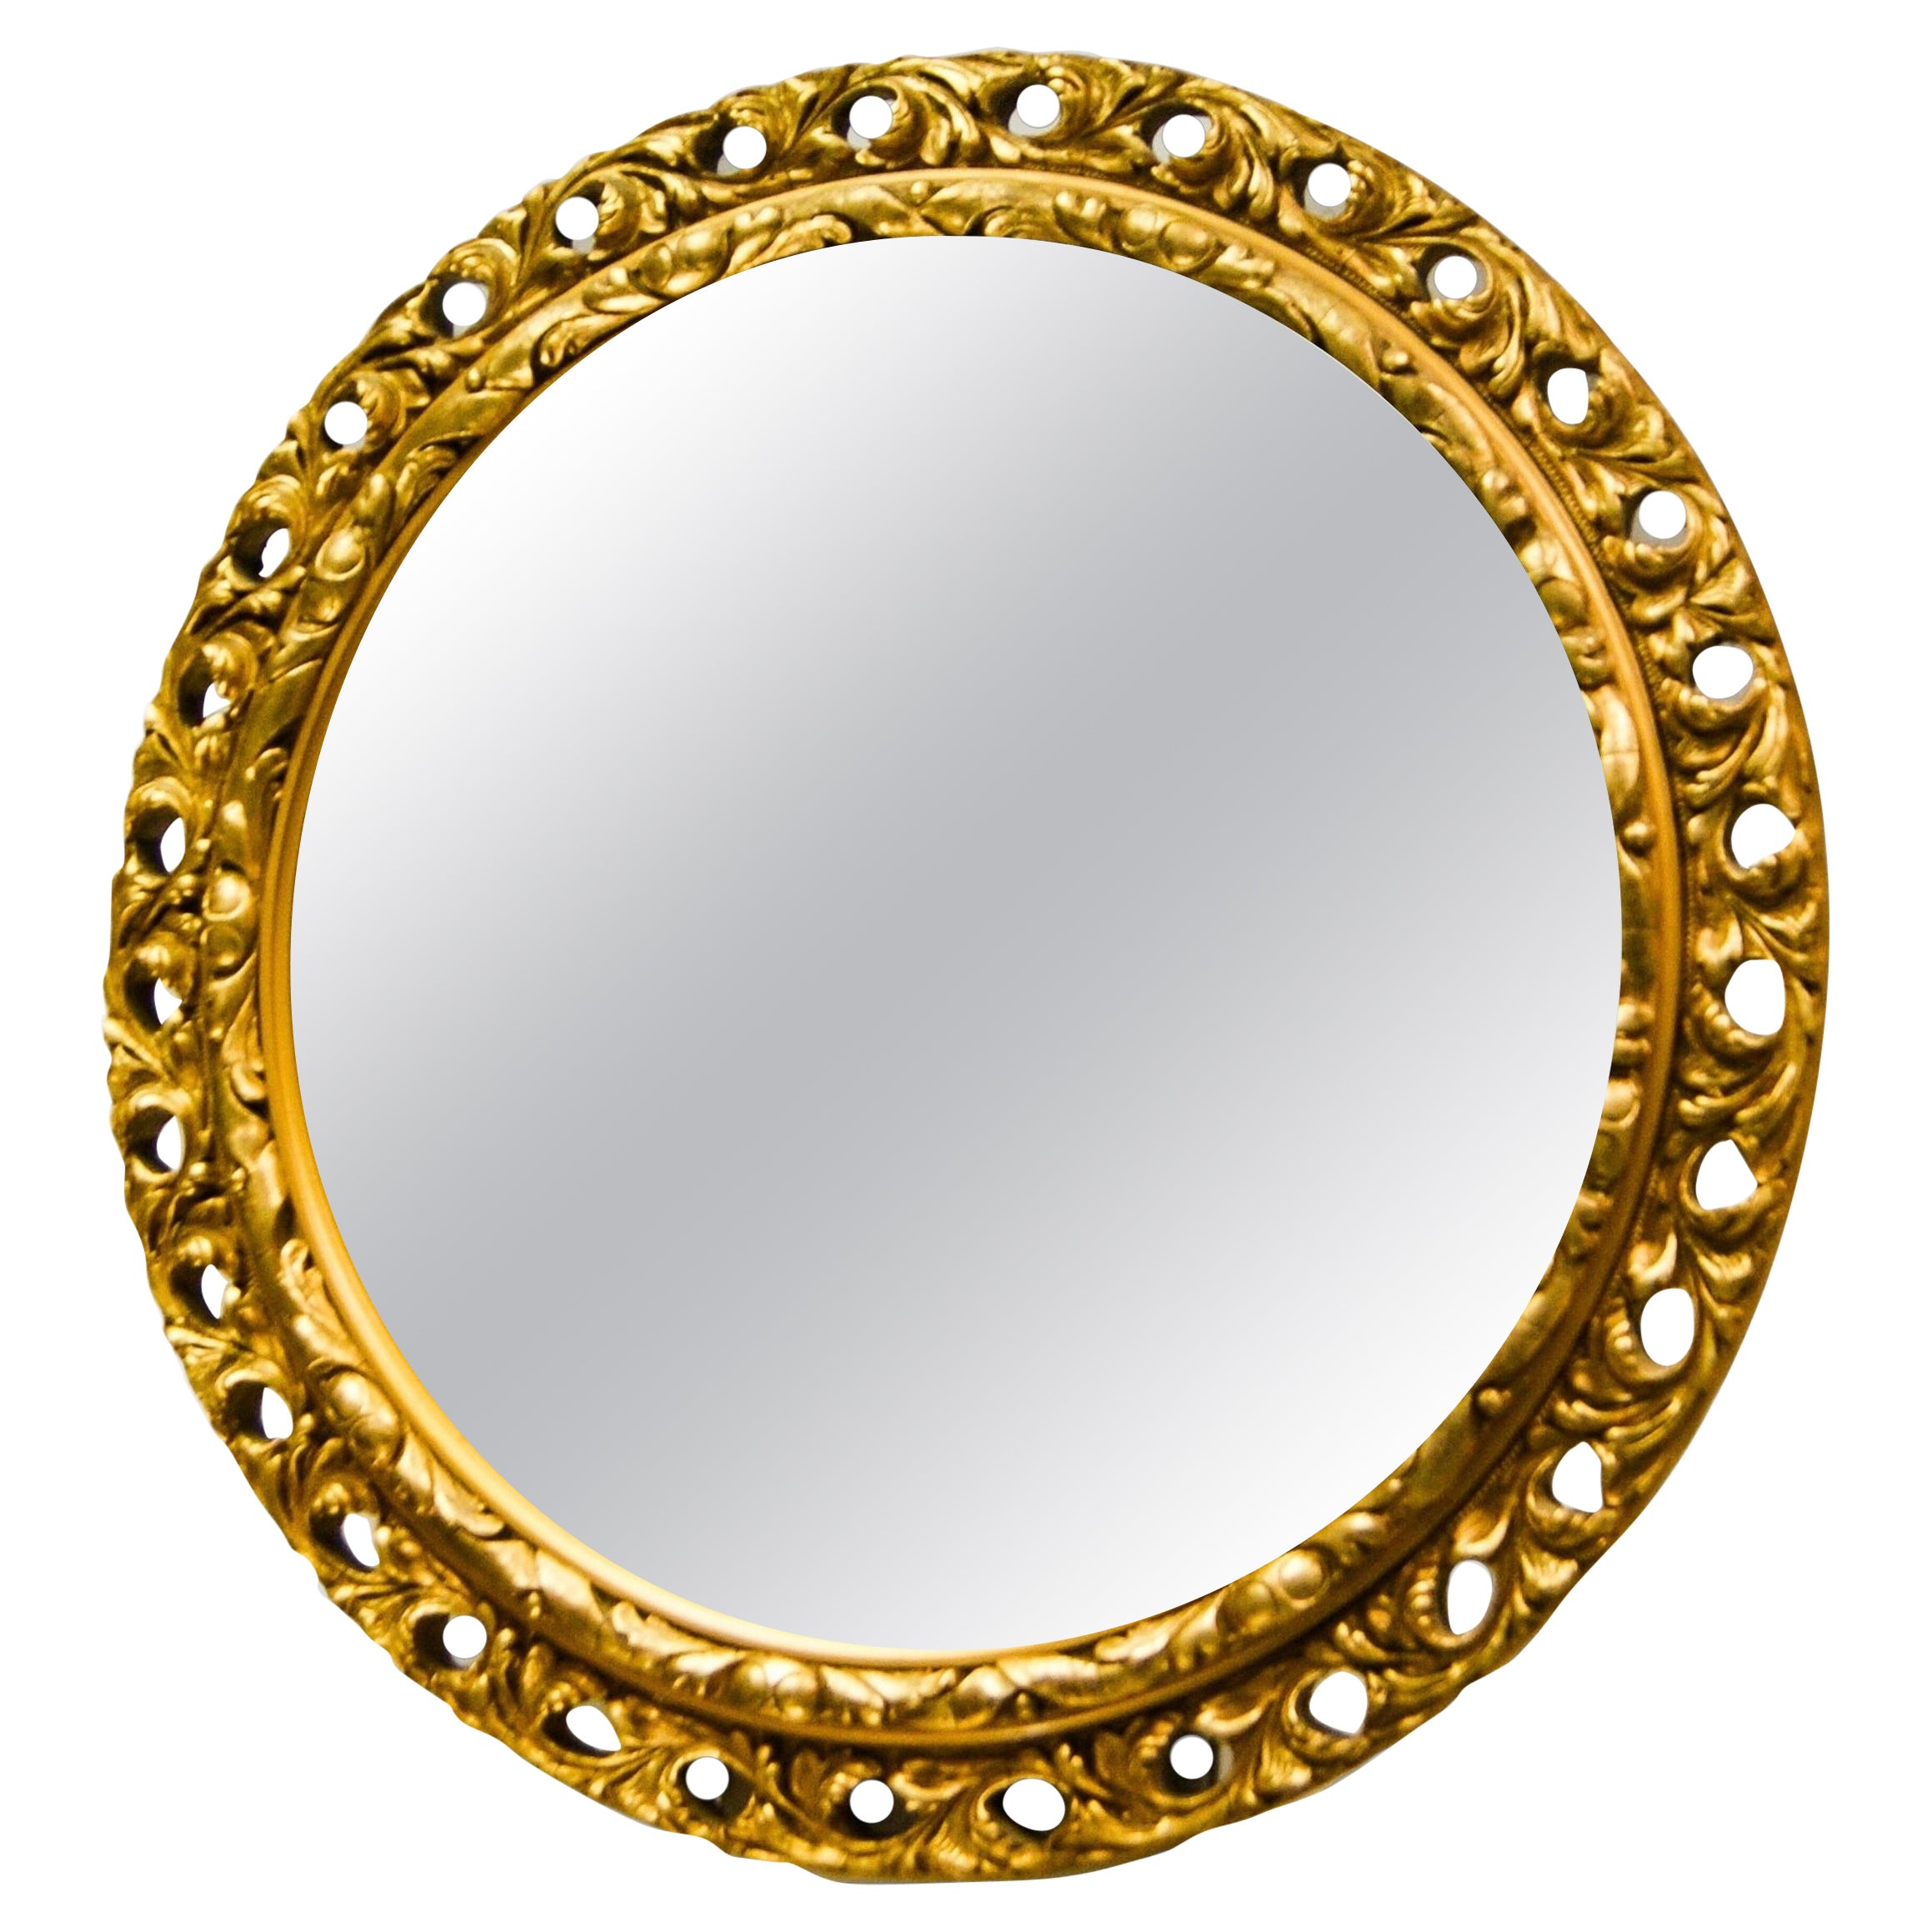 Midcentury French Large Gilded Convex Wall Hanging Mirror For Sale